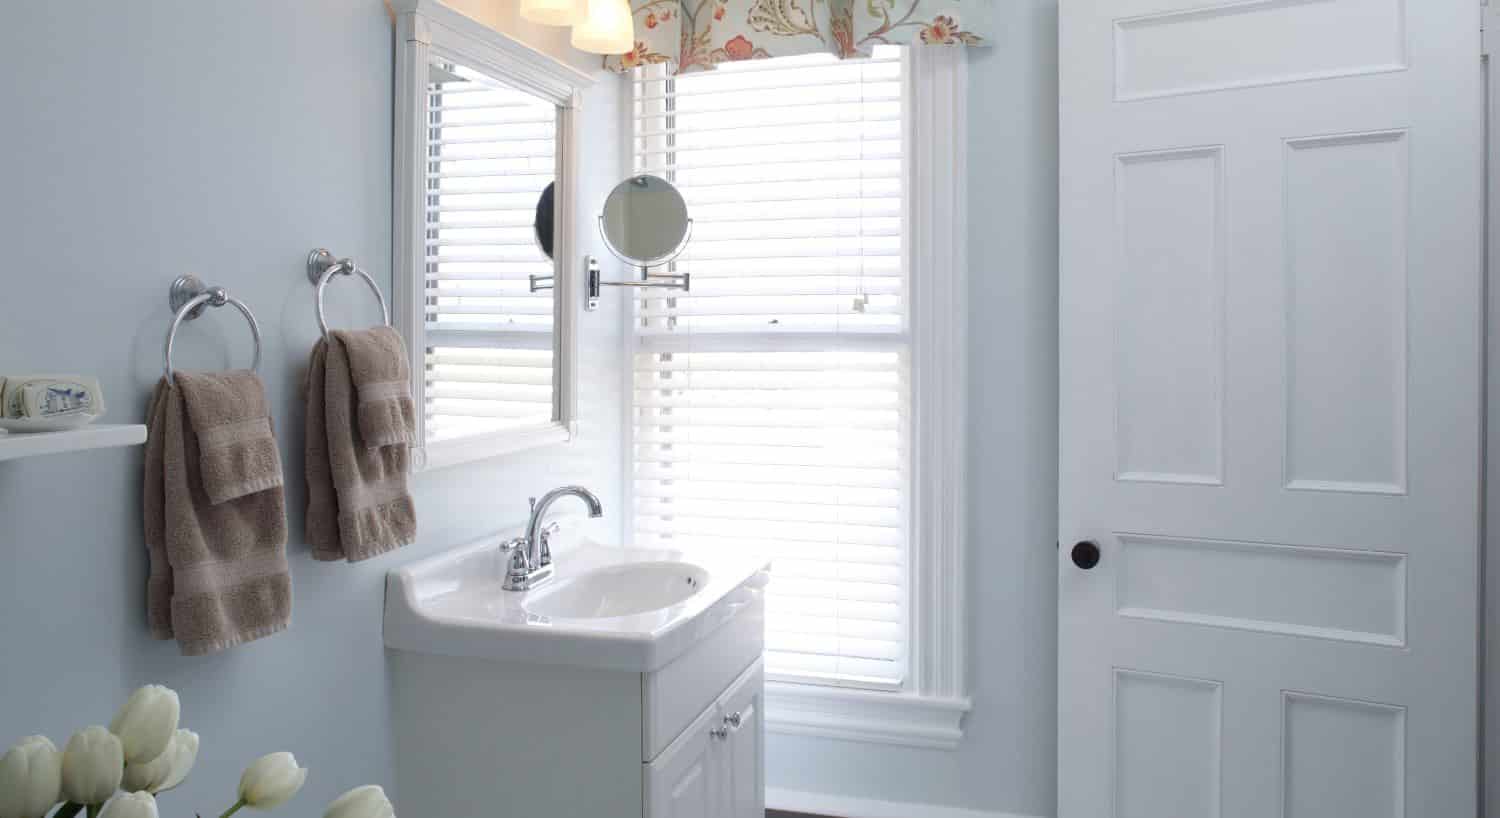 Bathroom with light blue walls, white vanity, white sink, and two hanging light brown sets of towels